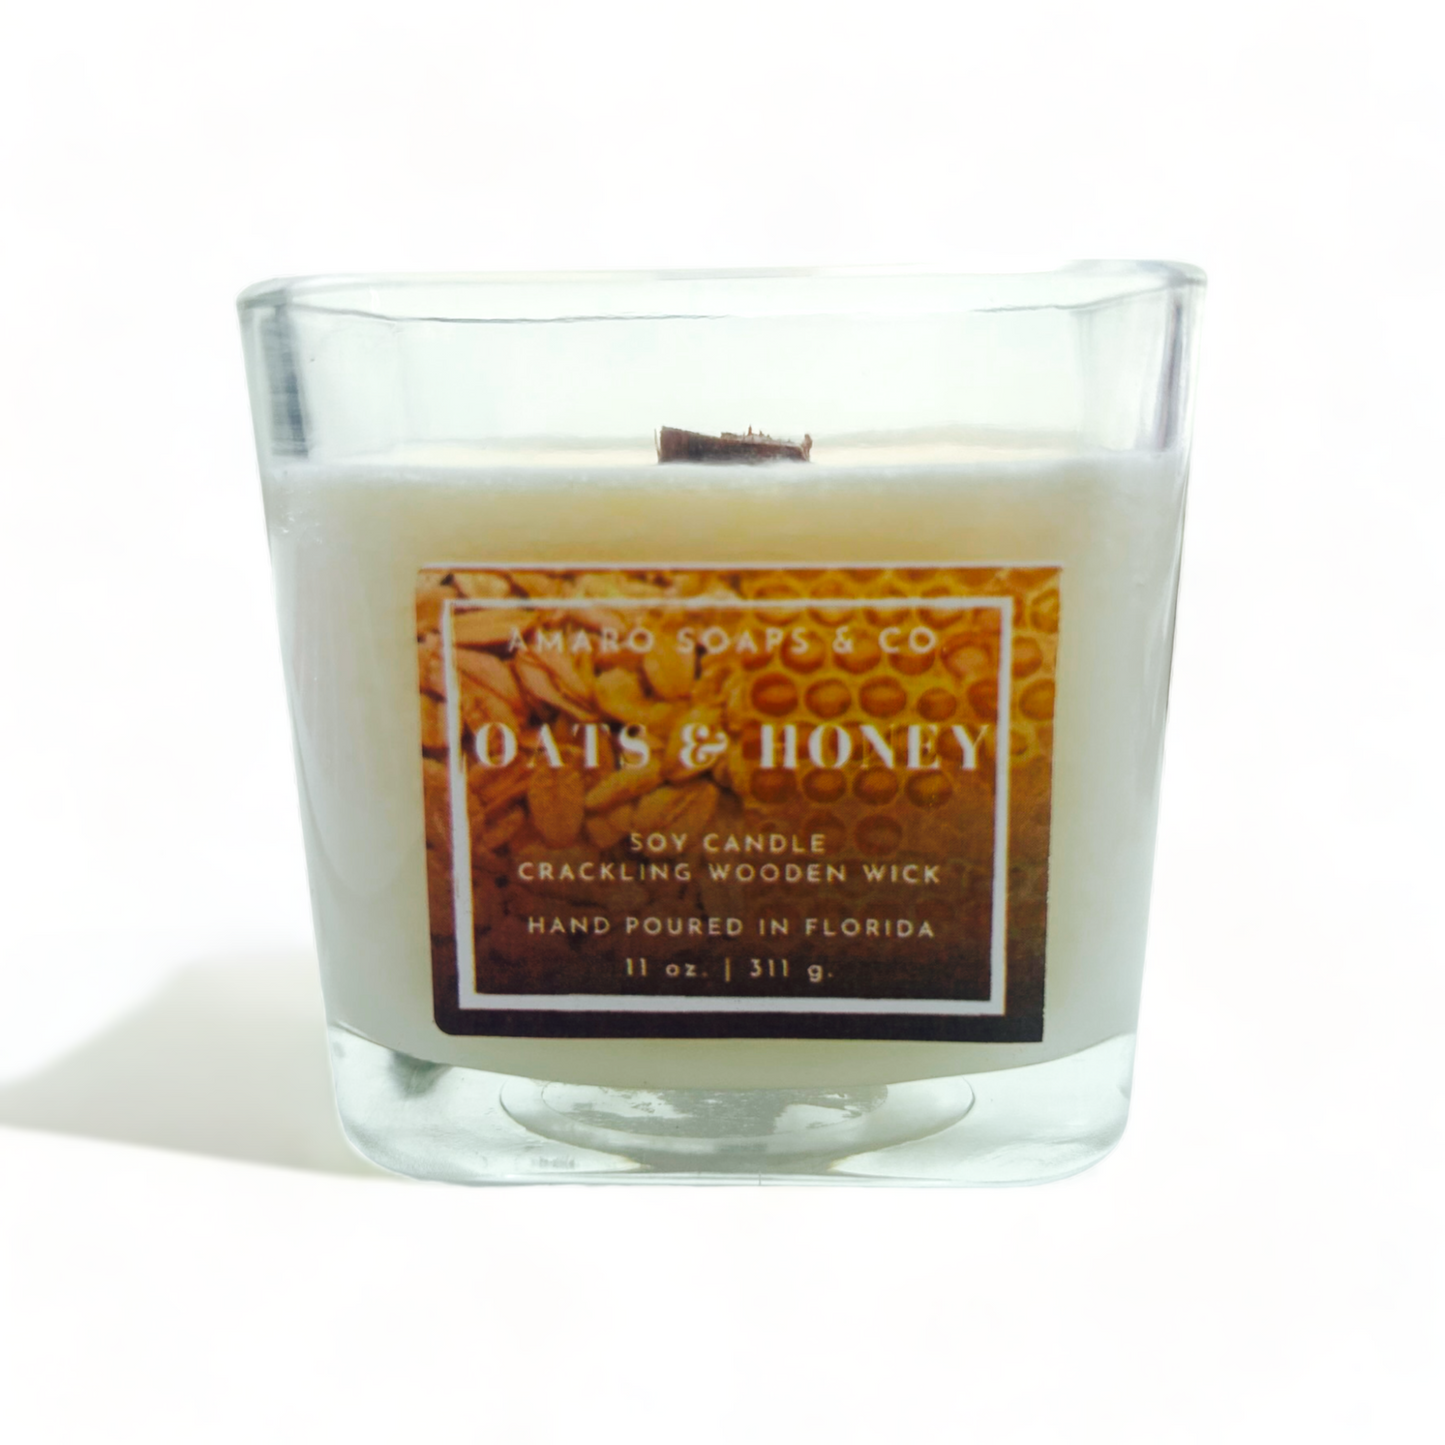 Oats & Honey Wooden Wick Soy Candle